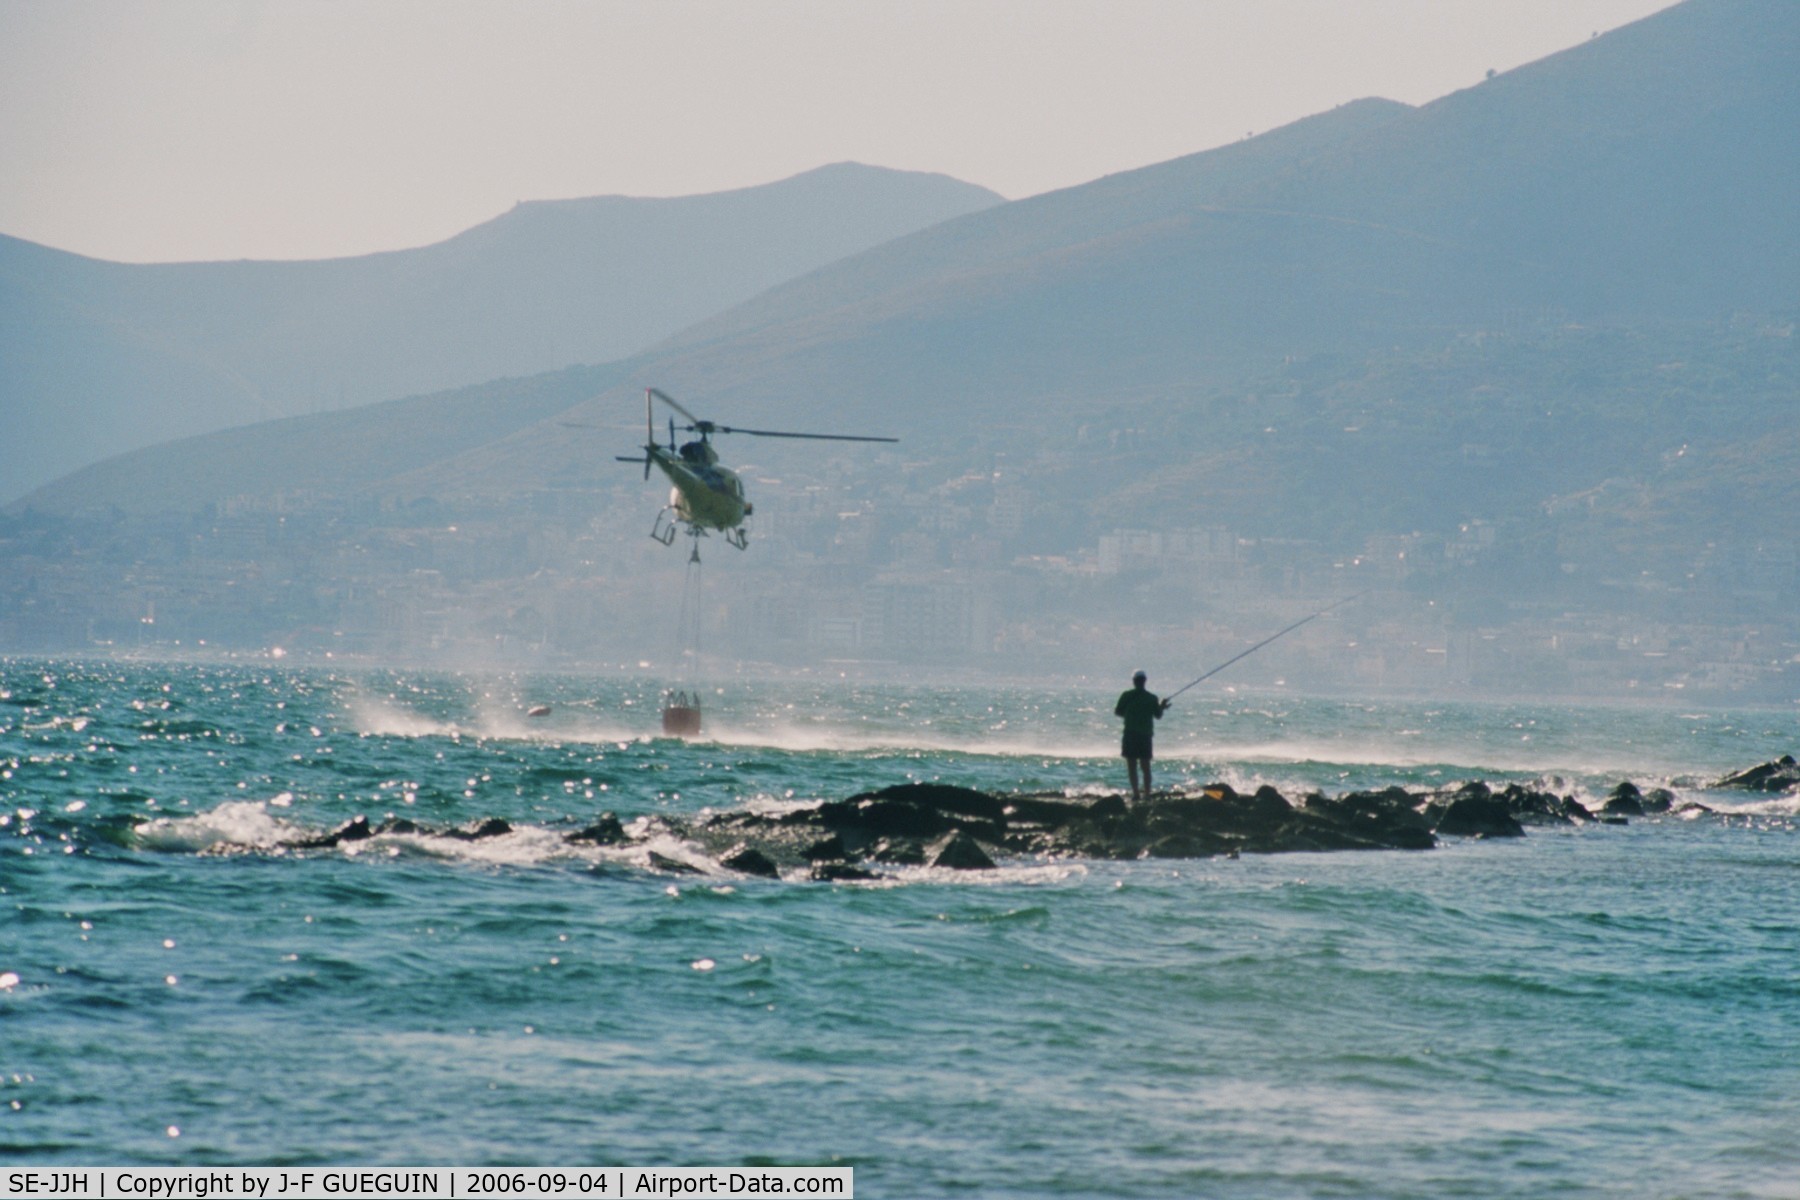 SE-JJH, Eurocopter AS-350B-3+ Ecureuil Ecureuil C/N 4072, SE-JJH while refilling in front of Formia (Italy).